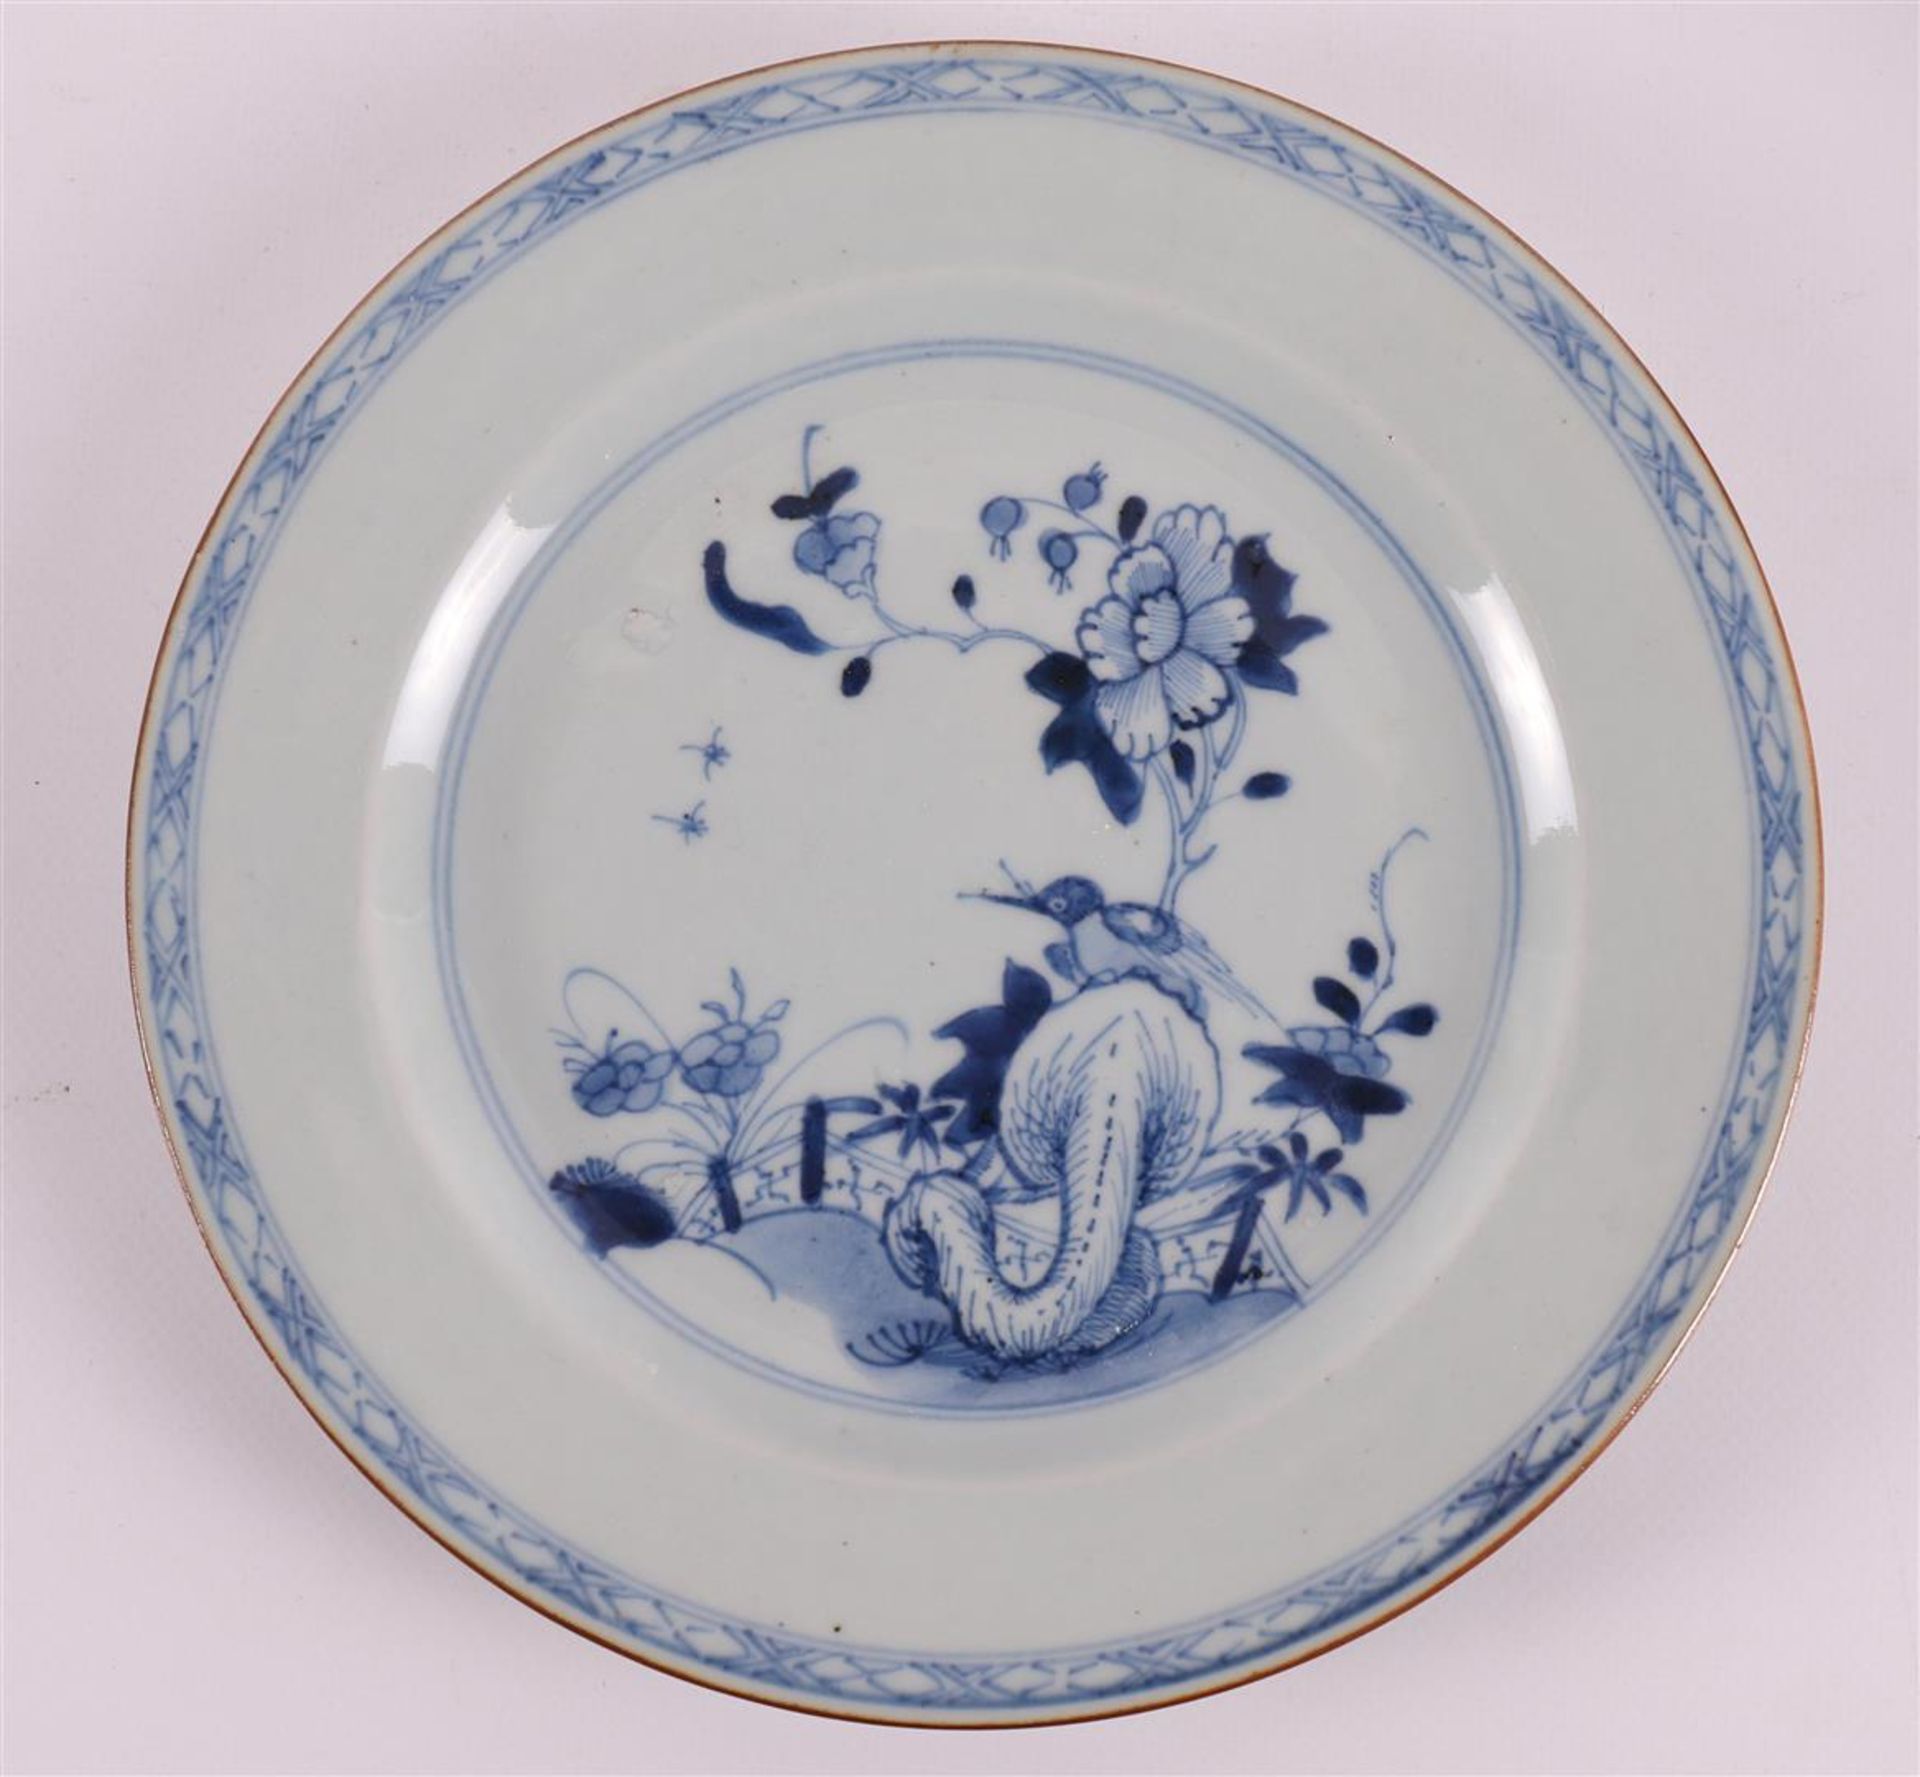 Three various blue/white porcelain plates, China, Qing Dynasty, around 1800. - Image 7 of 10